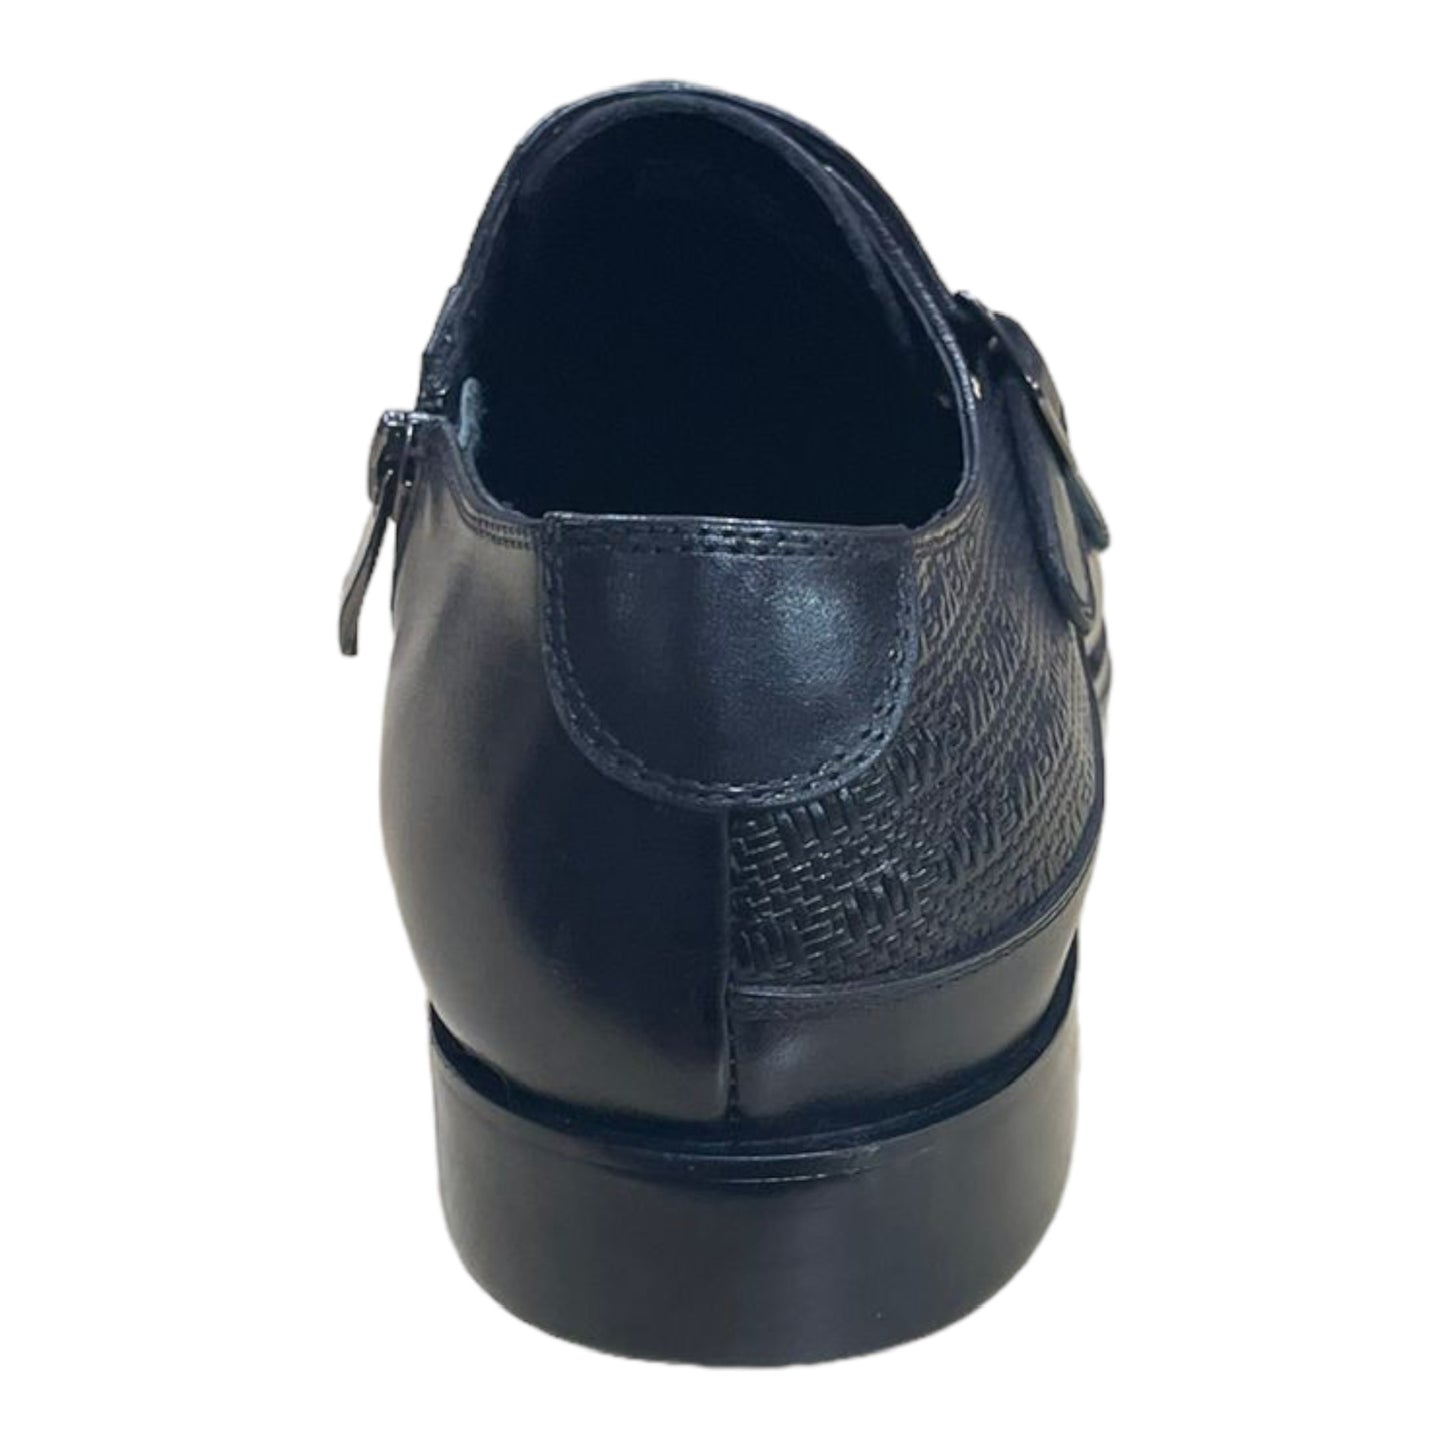 GIOVANNI: Pacey Dress Shoe